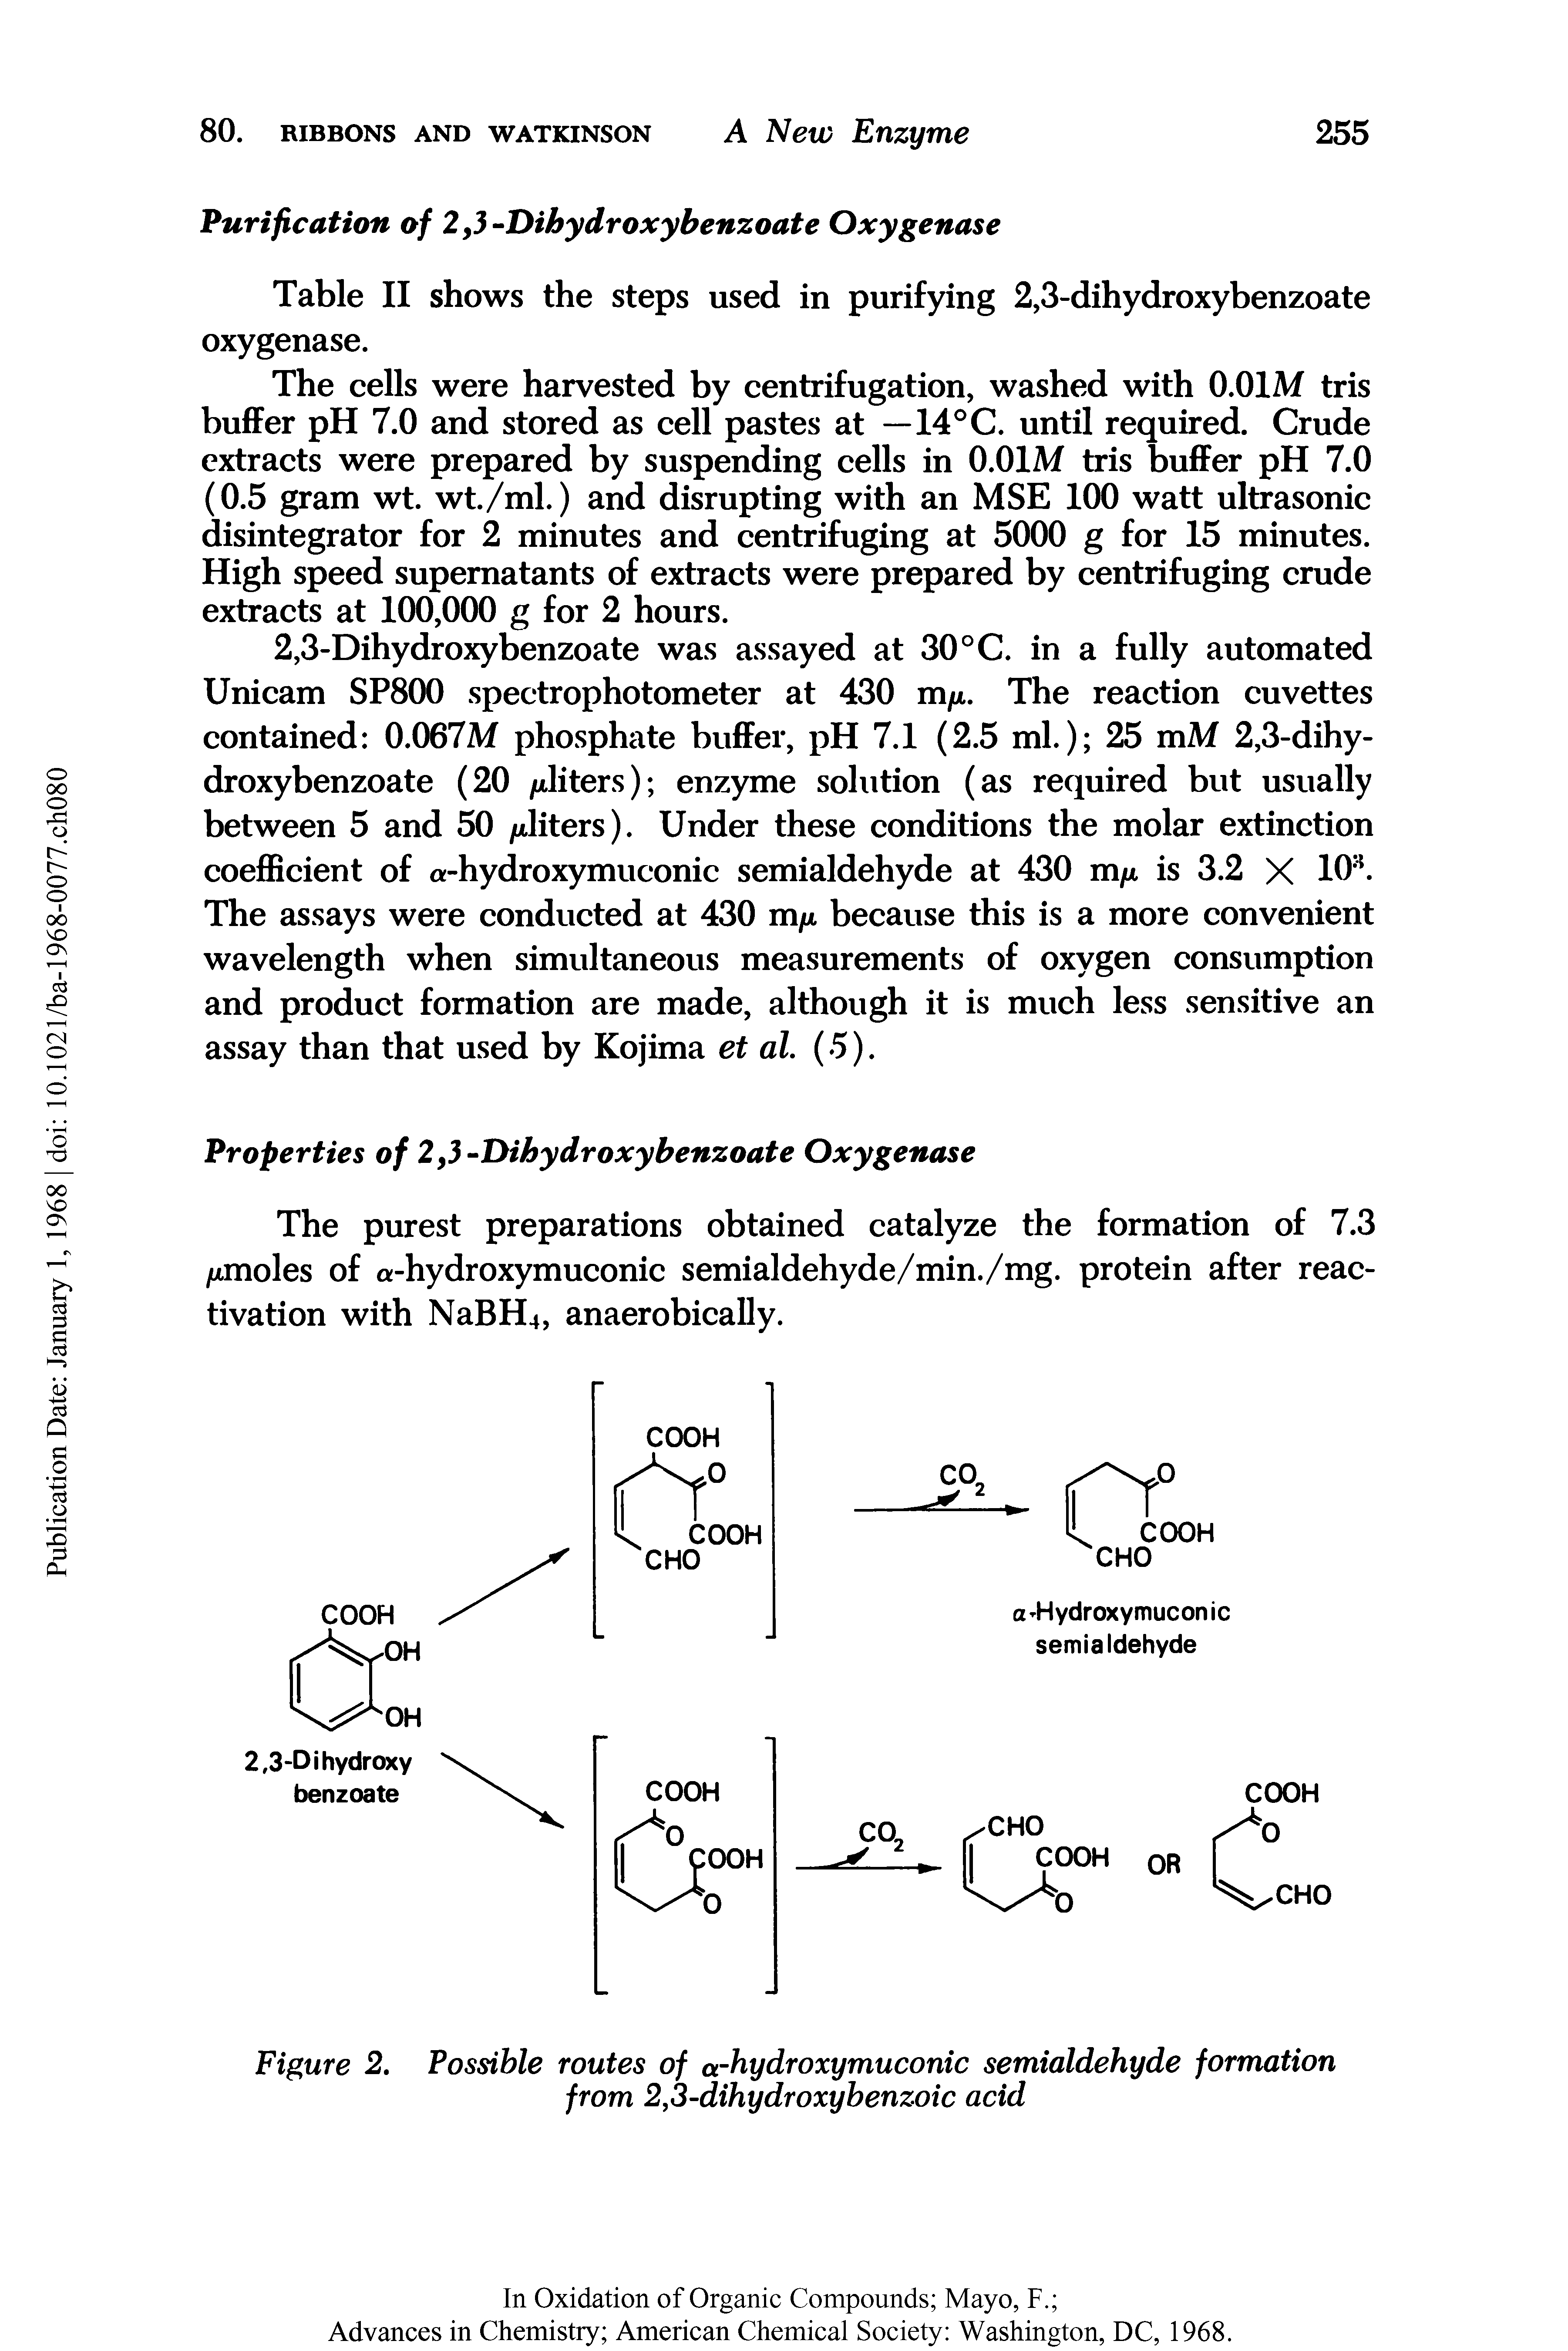 Figure 2. Possible routes of a-hydroxymuconic semialdehyde formation from 2,3-dihydroxybenzoic acid...